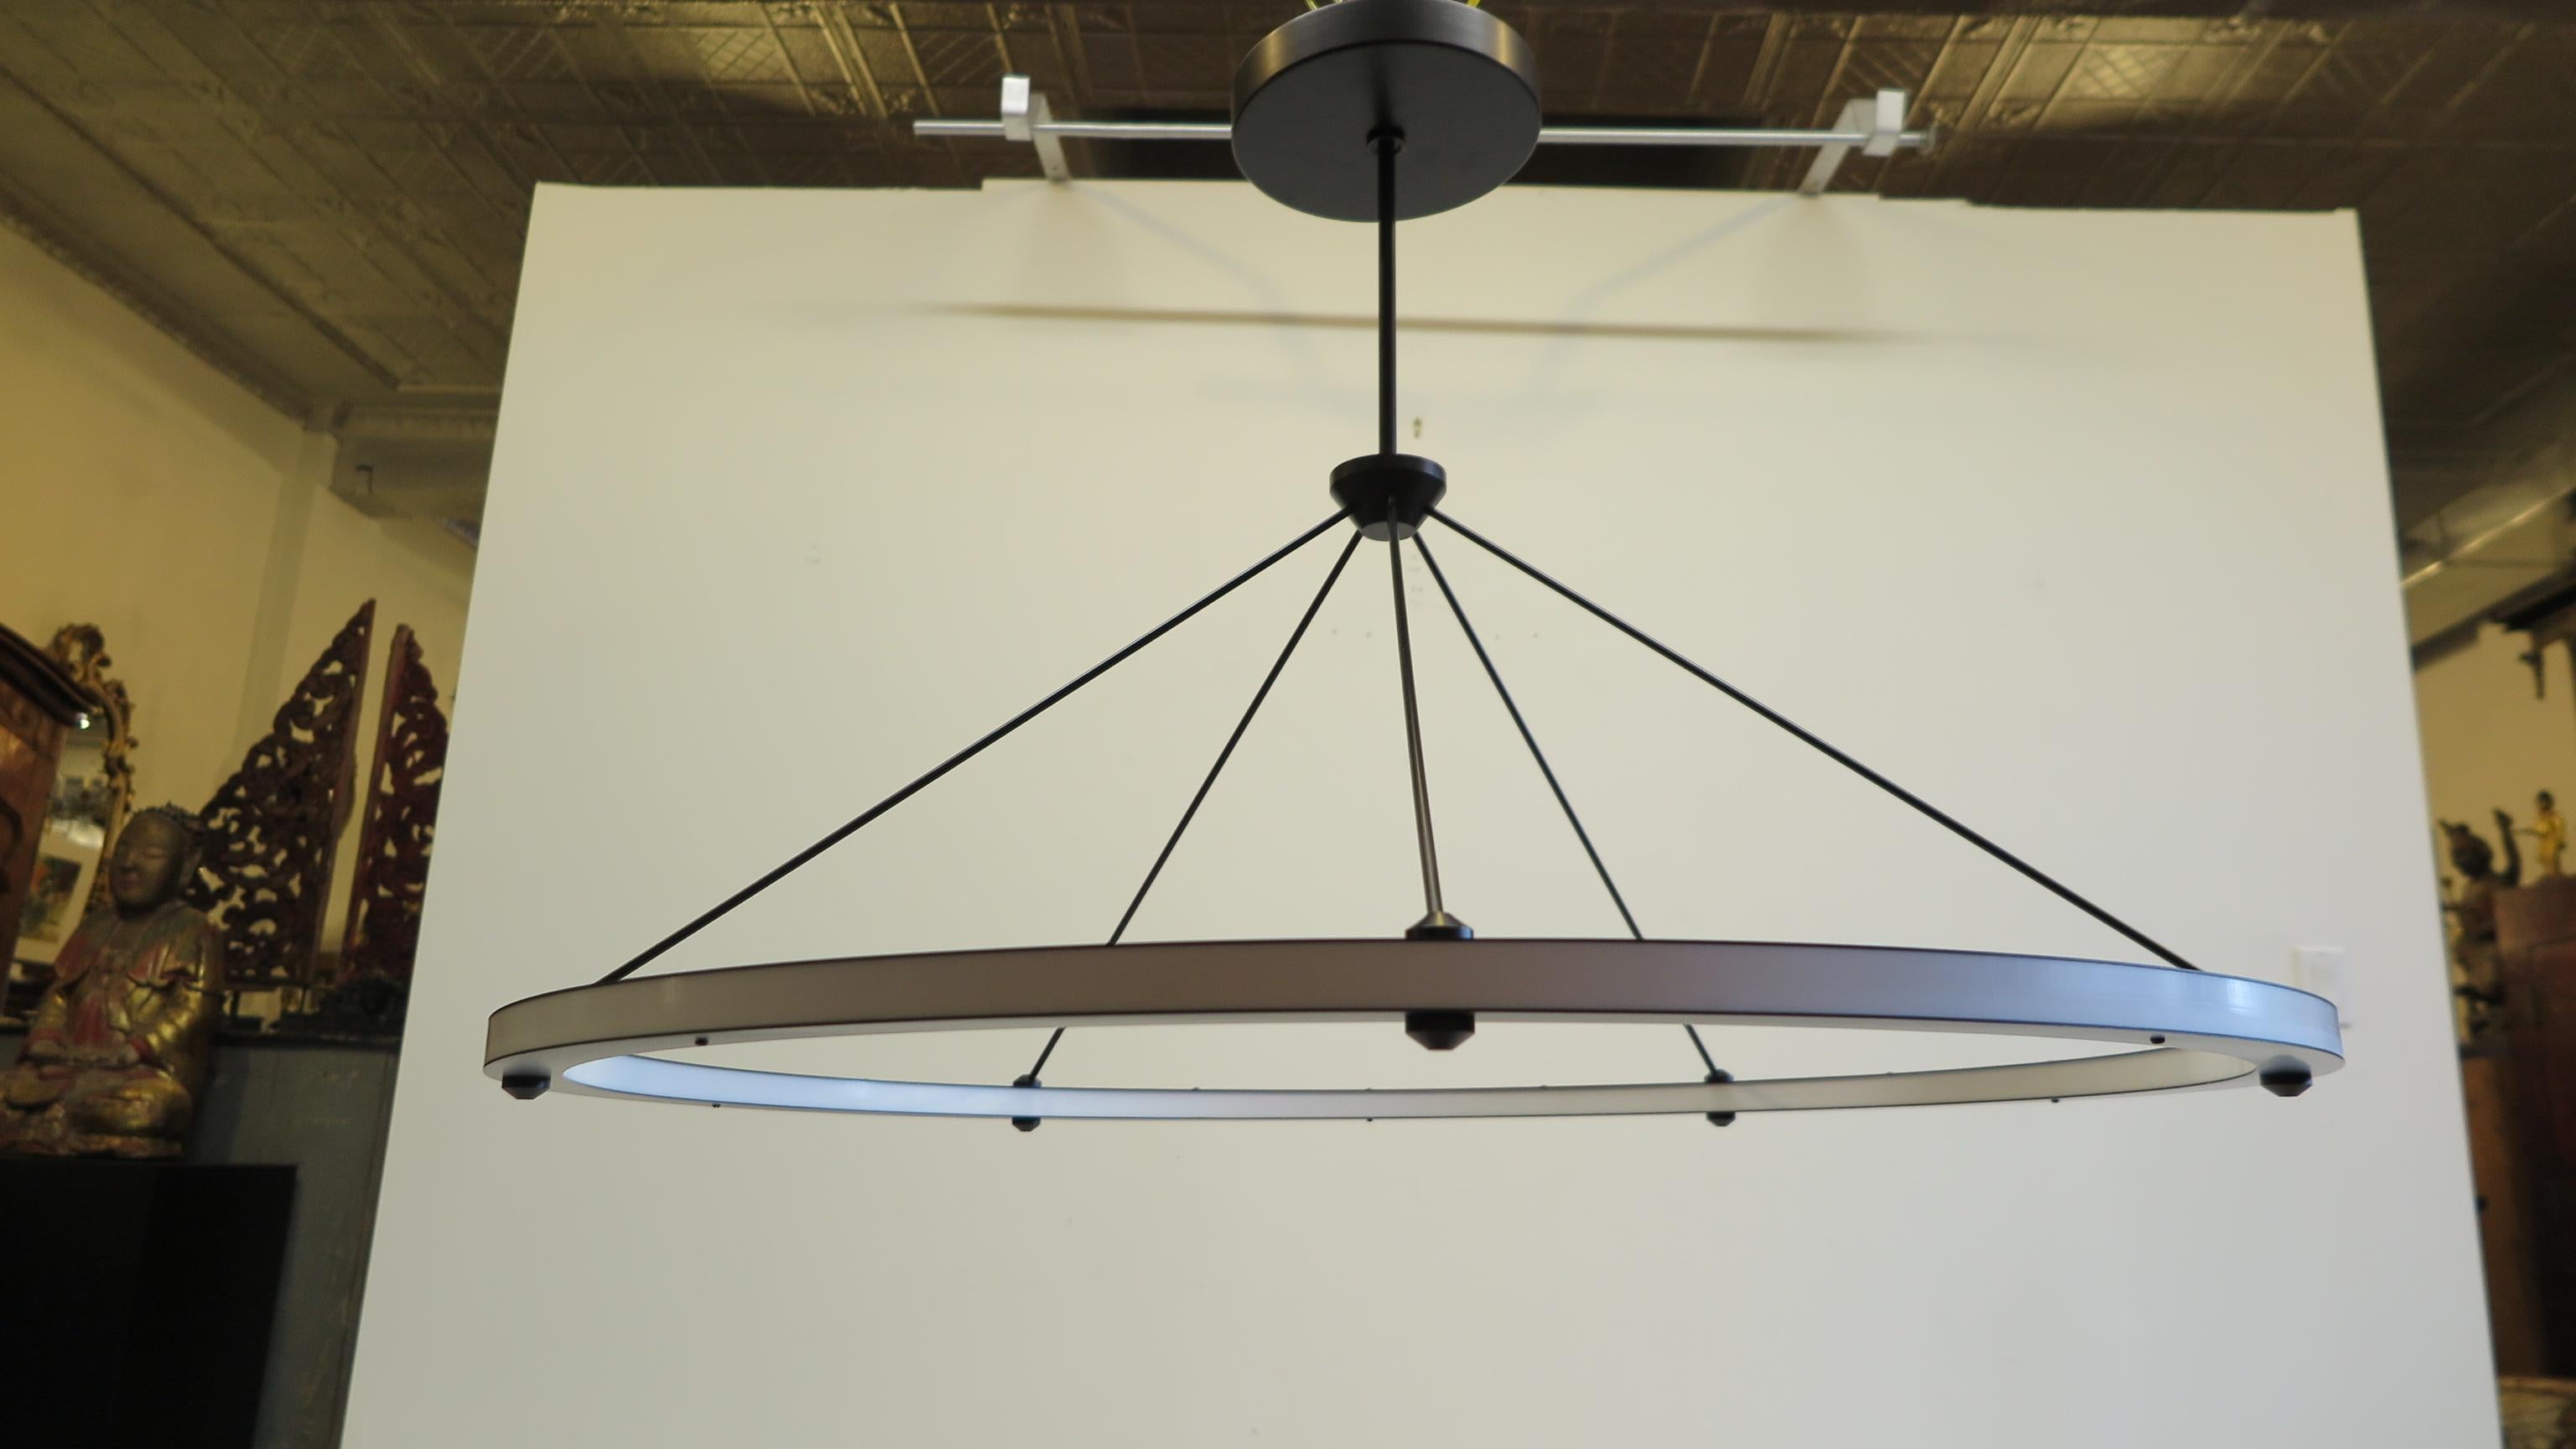 Roll & Hill Halo circle pendant light in black. An outer and inner ring of continuous illuminating Energy-efficient LED technology, completely dimmable. Fixture is in perfect working order and excellent condition. The Halo Circle Pendant Light